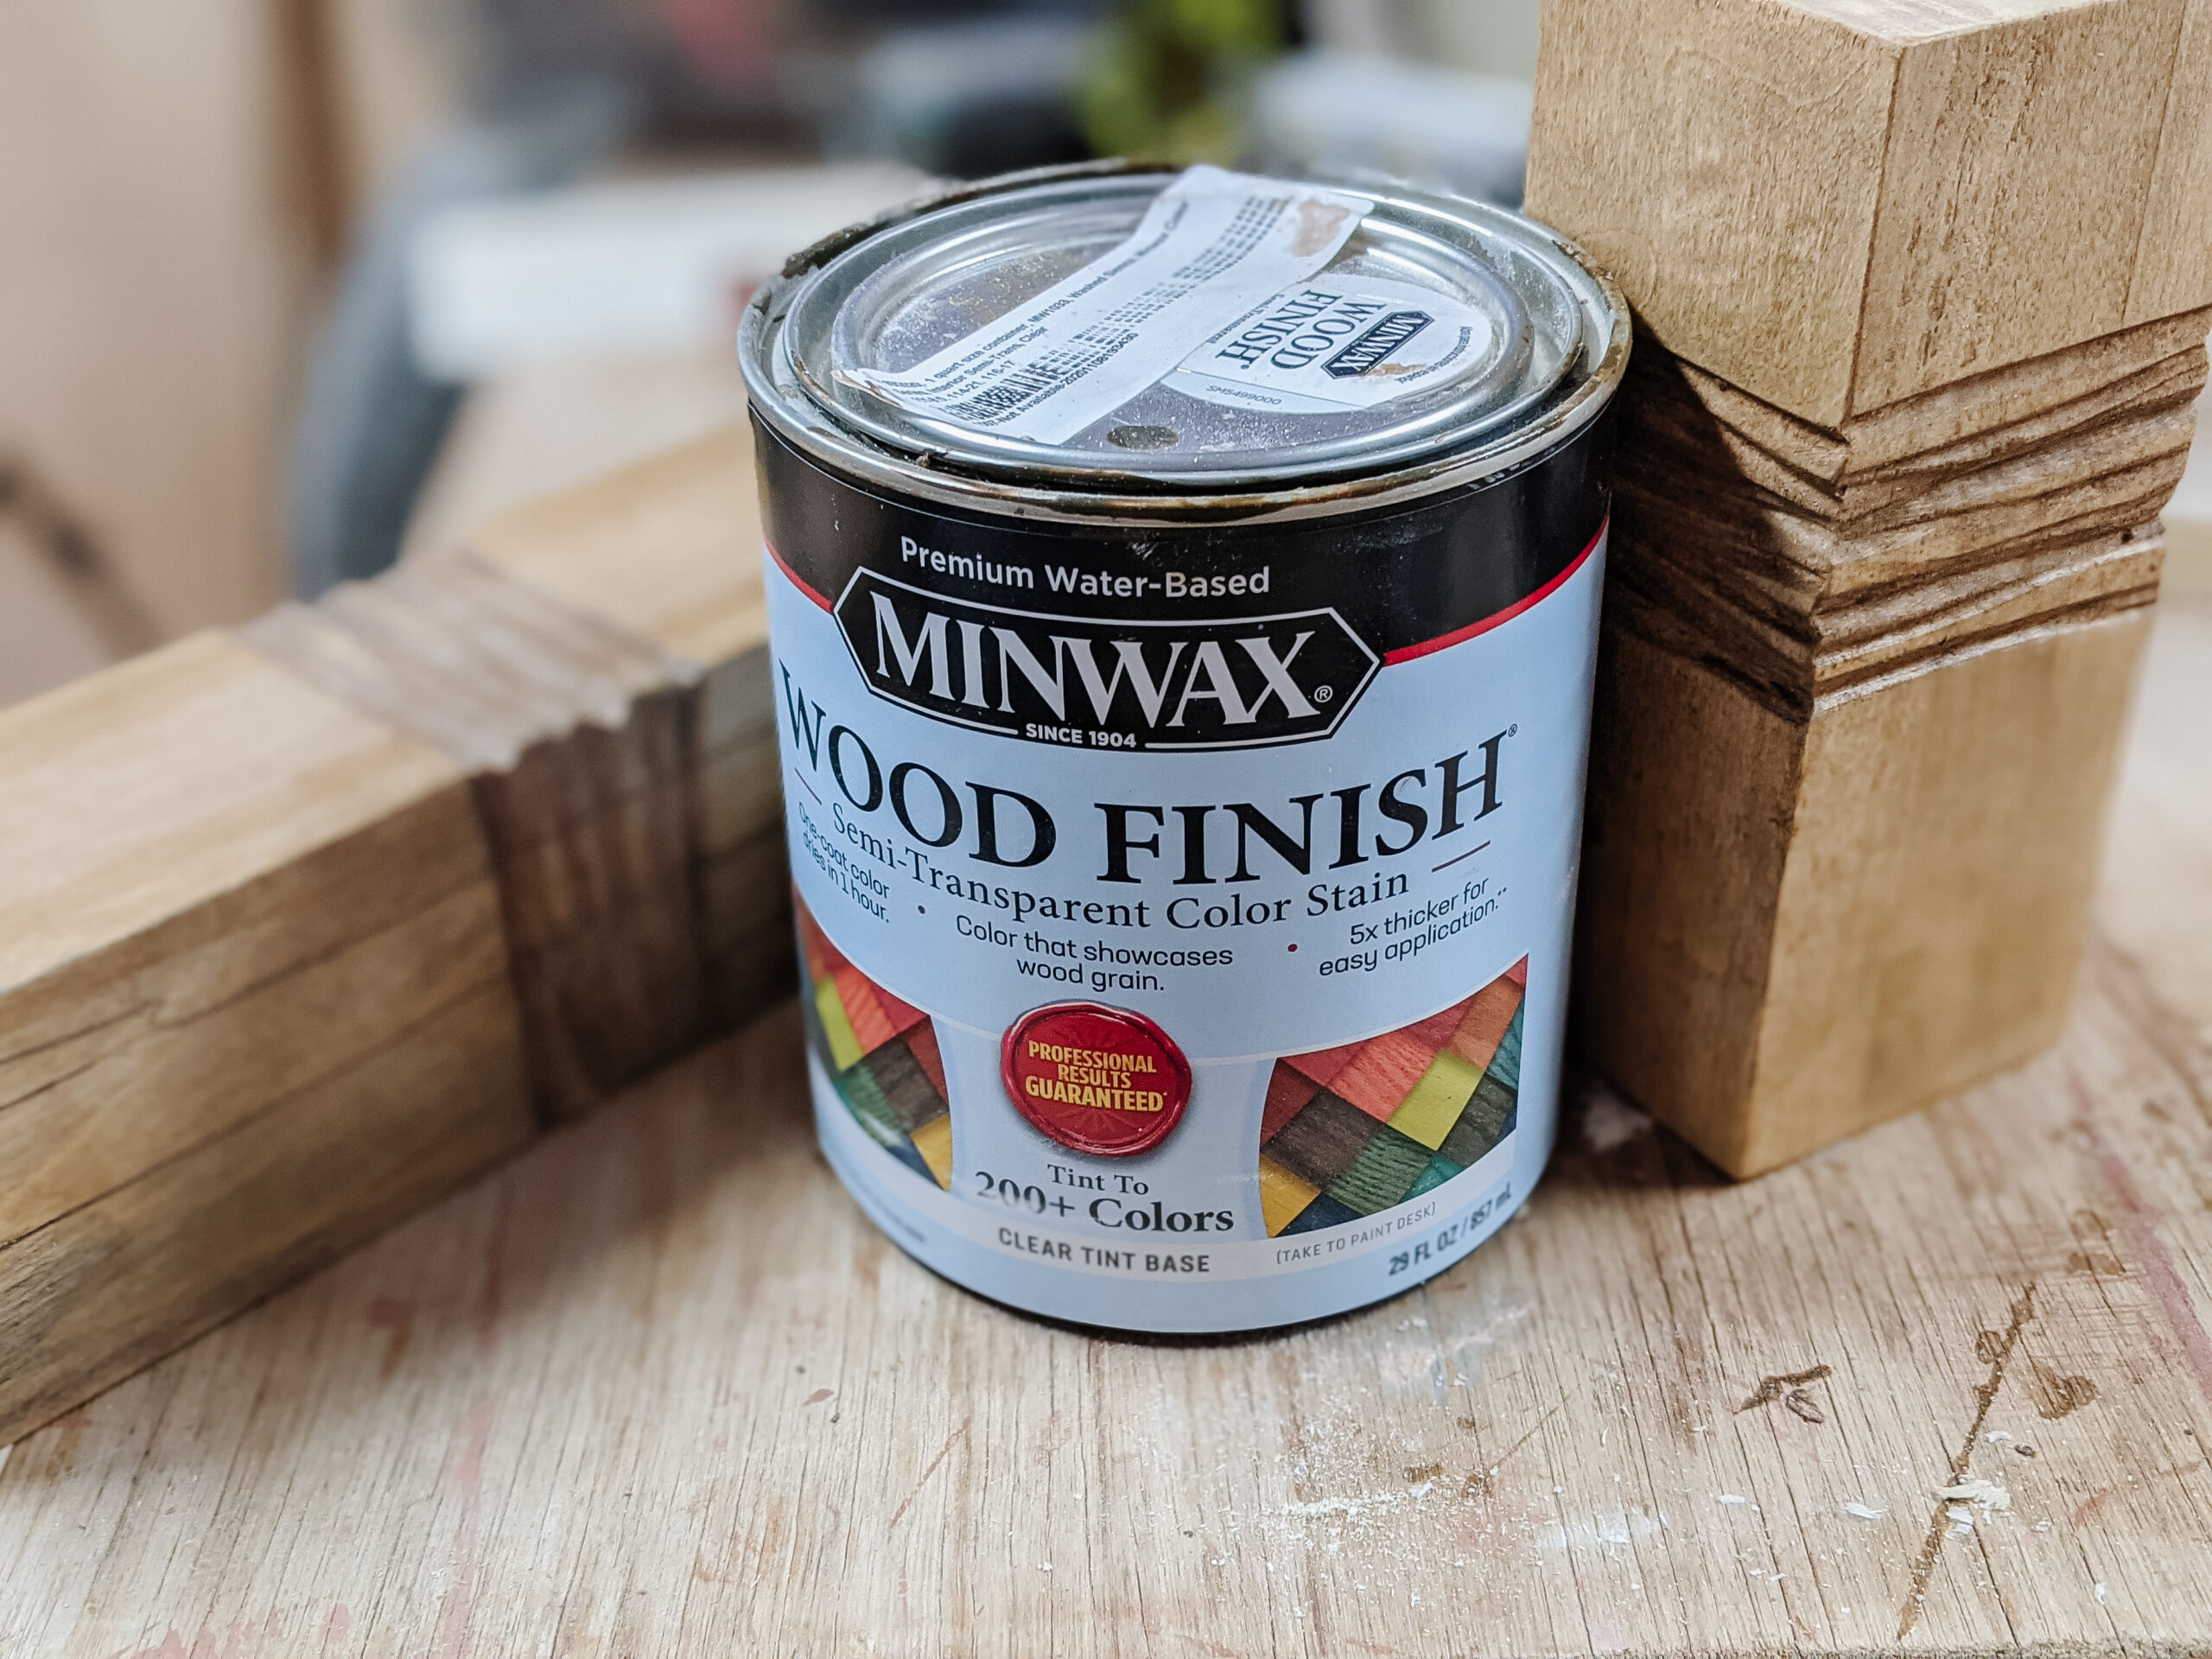 Minwax Water Based Semi Transparent Stain in Vermont Maple